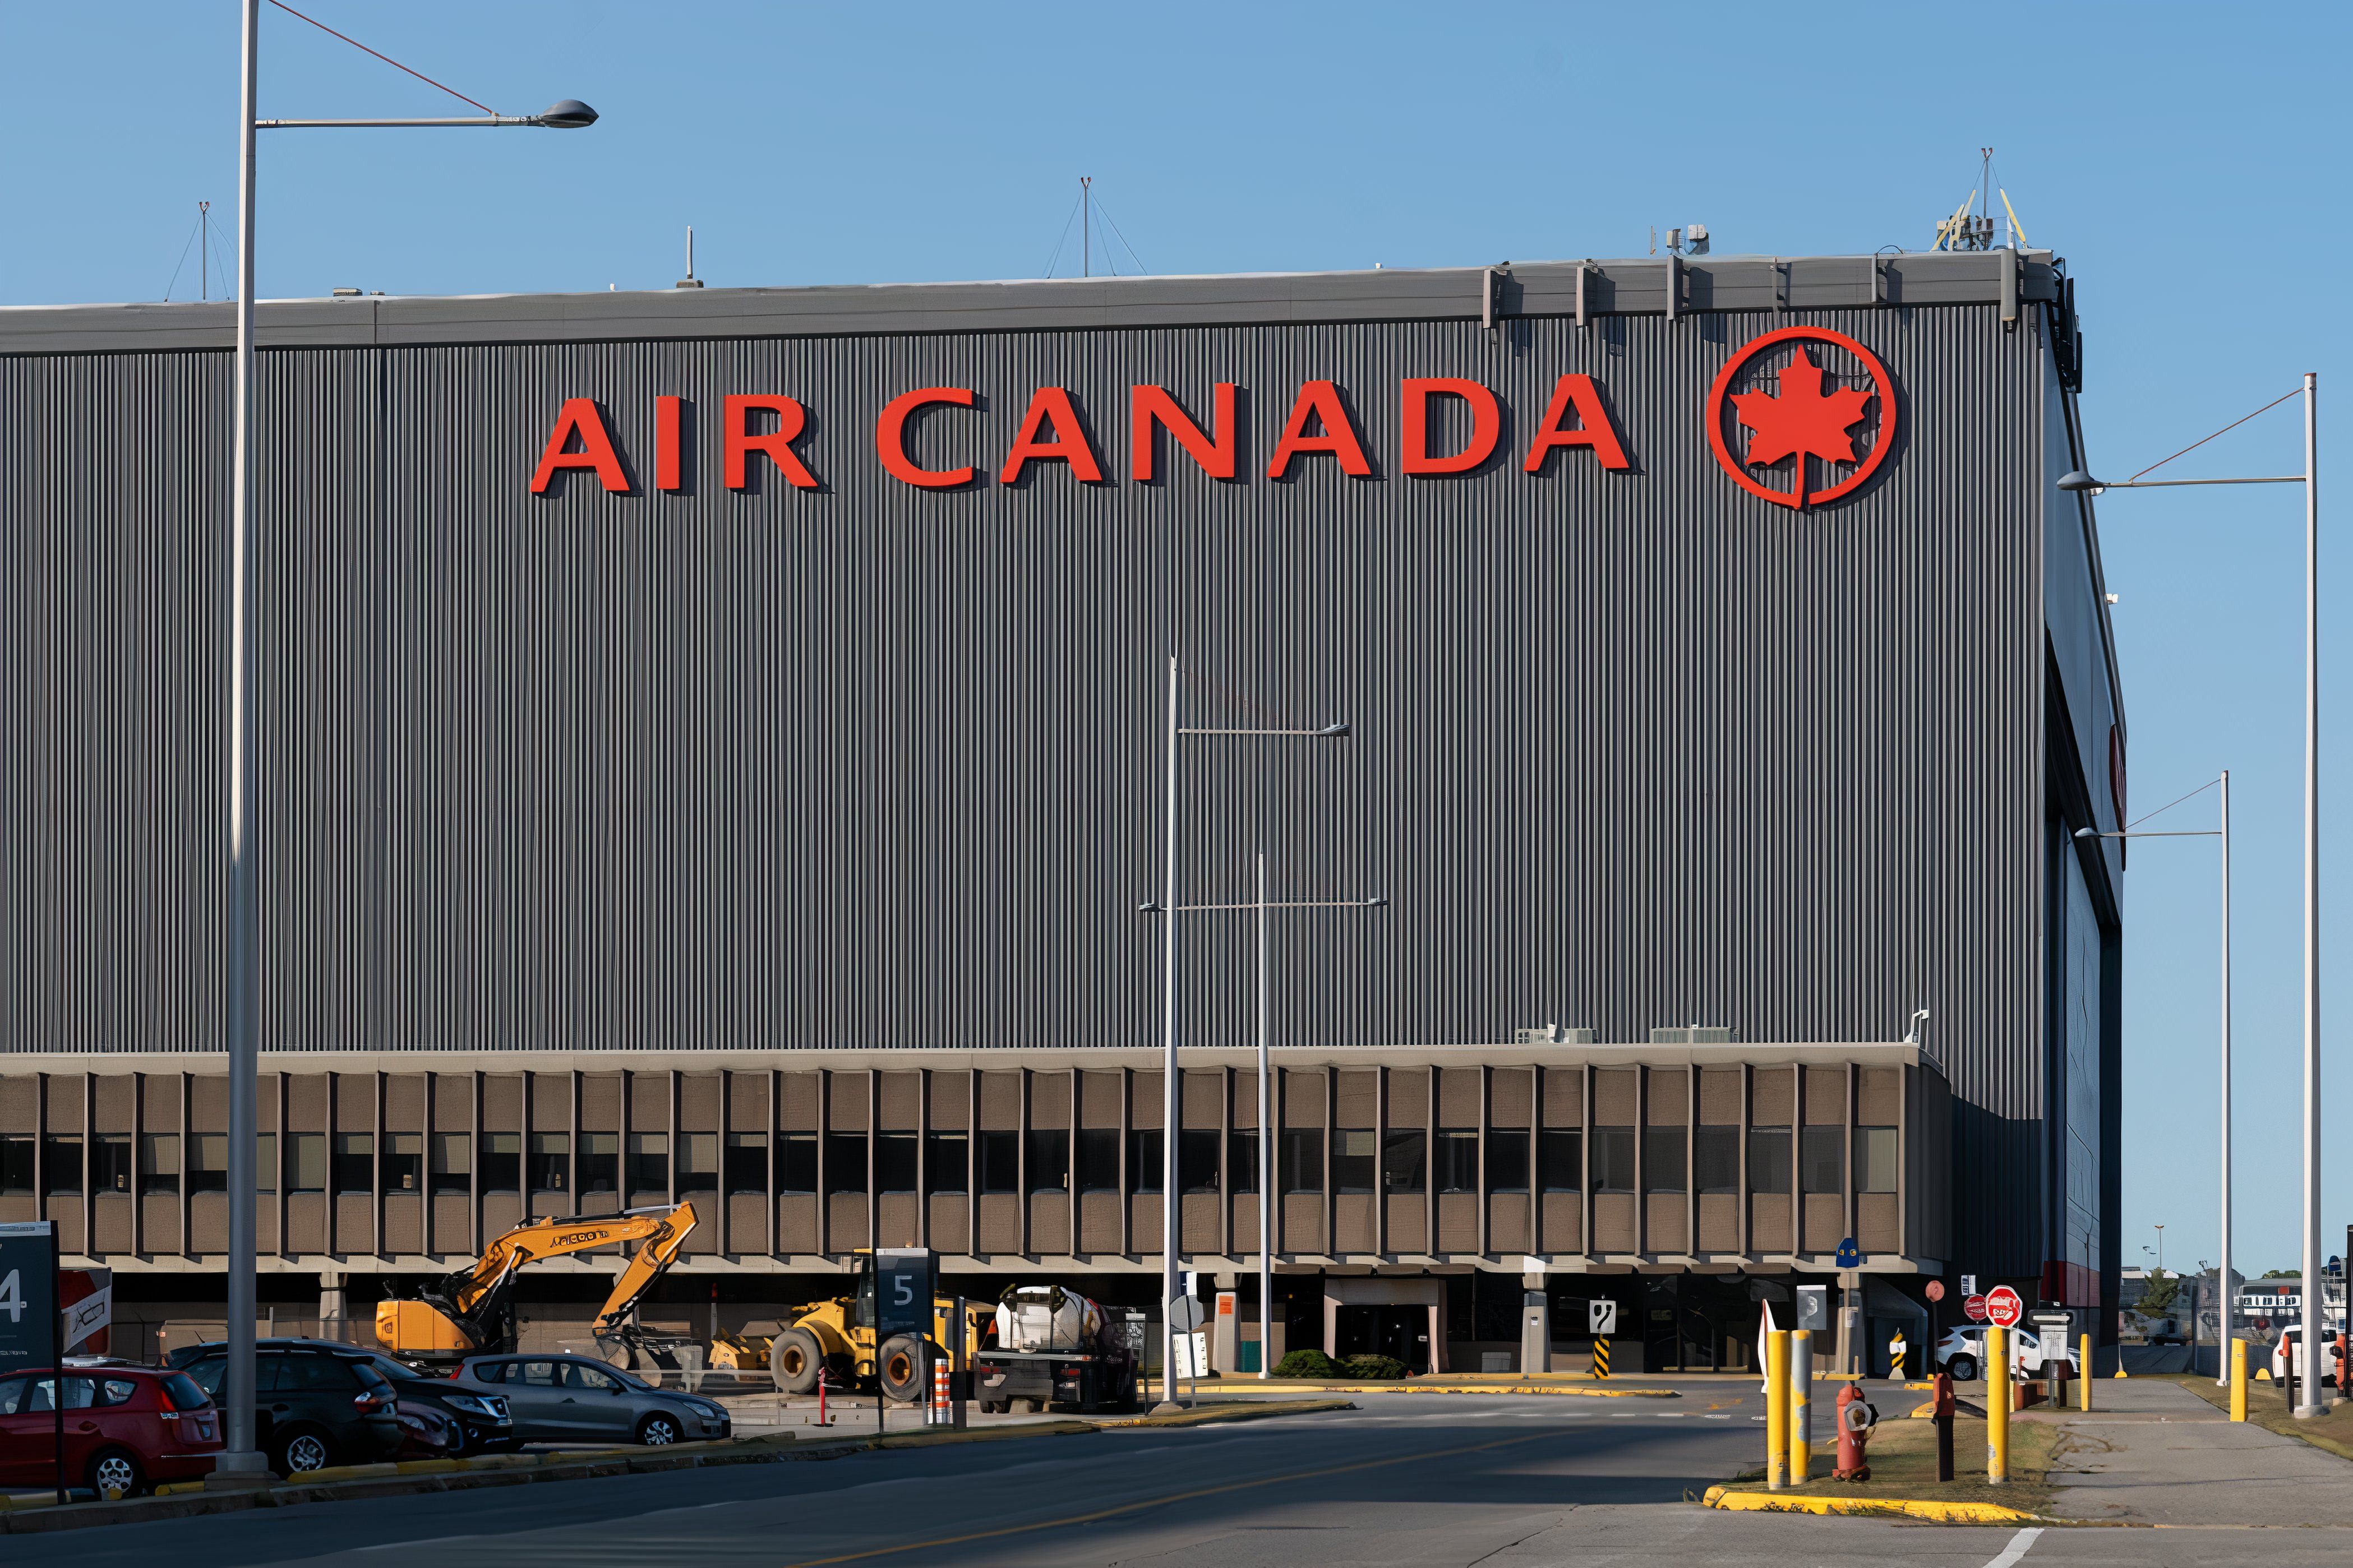 Air Canada headquarters in Montreal, QC. Air Canada is the largest airline of Canada by fleet size and passengers carried.